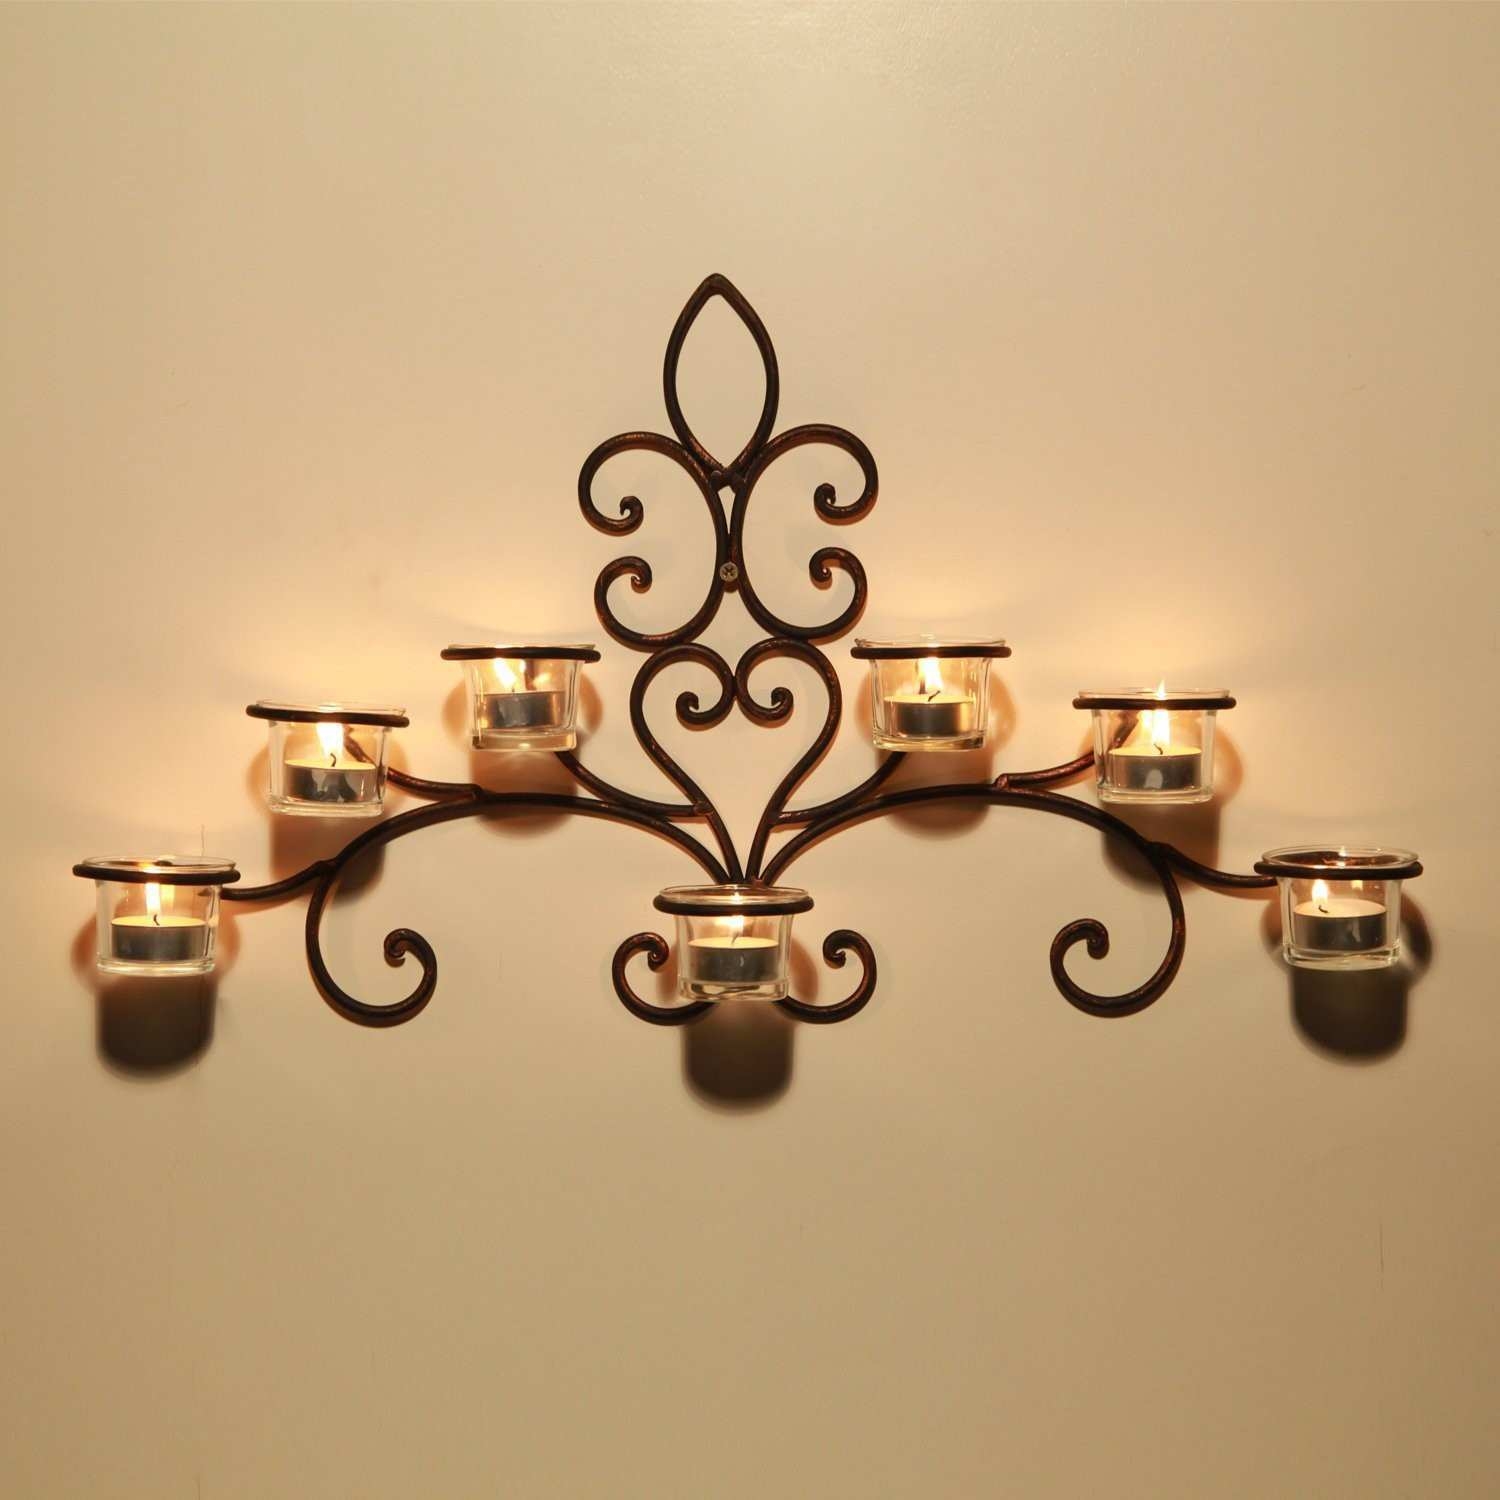 Modern Art Candle Holder Wall Black Sconce Plaque Set Home Wedding P3H1 One N9A2 